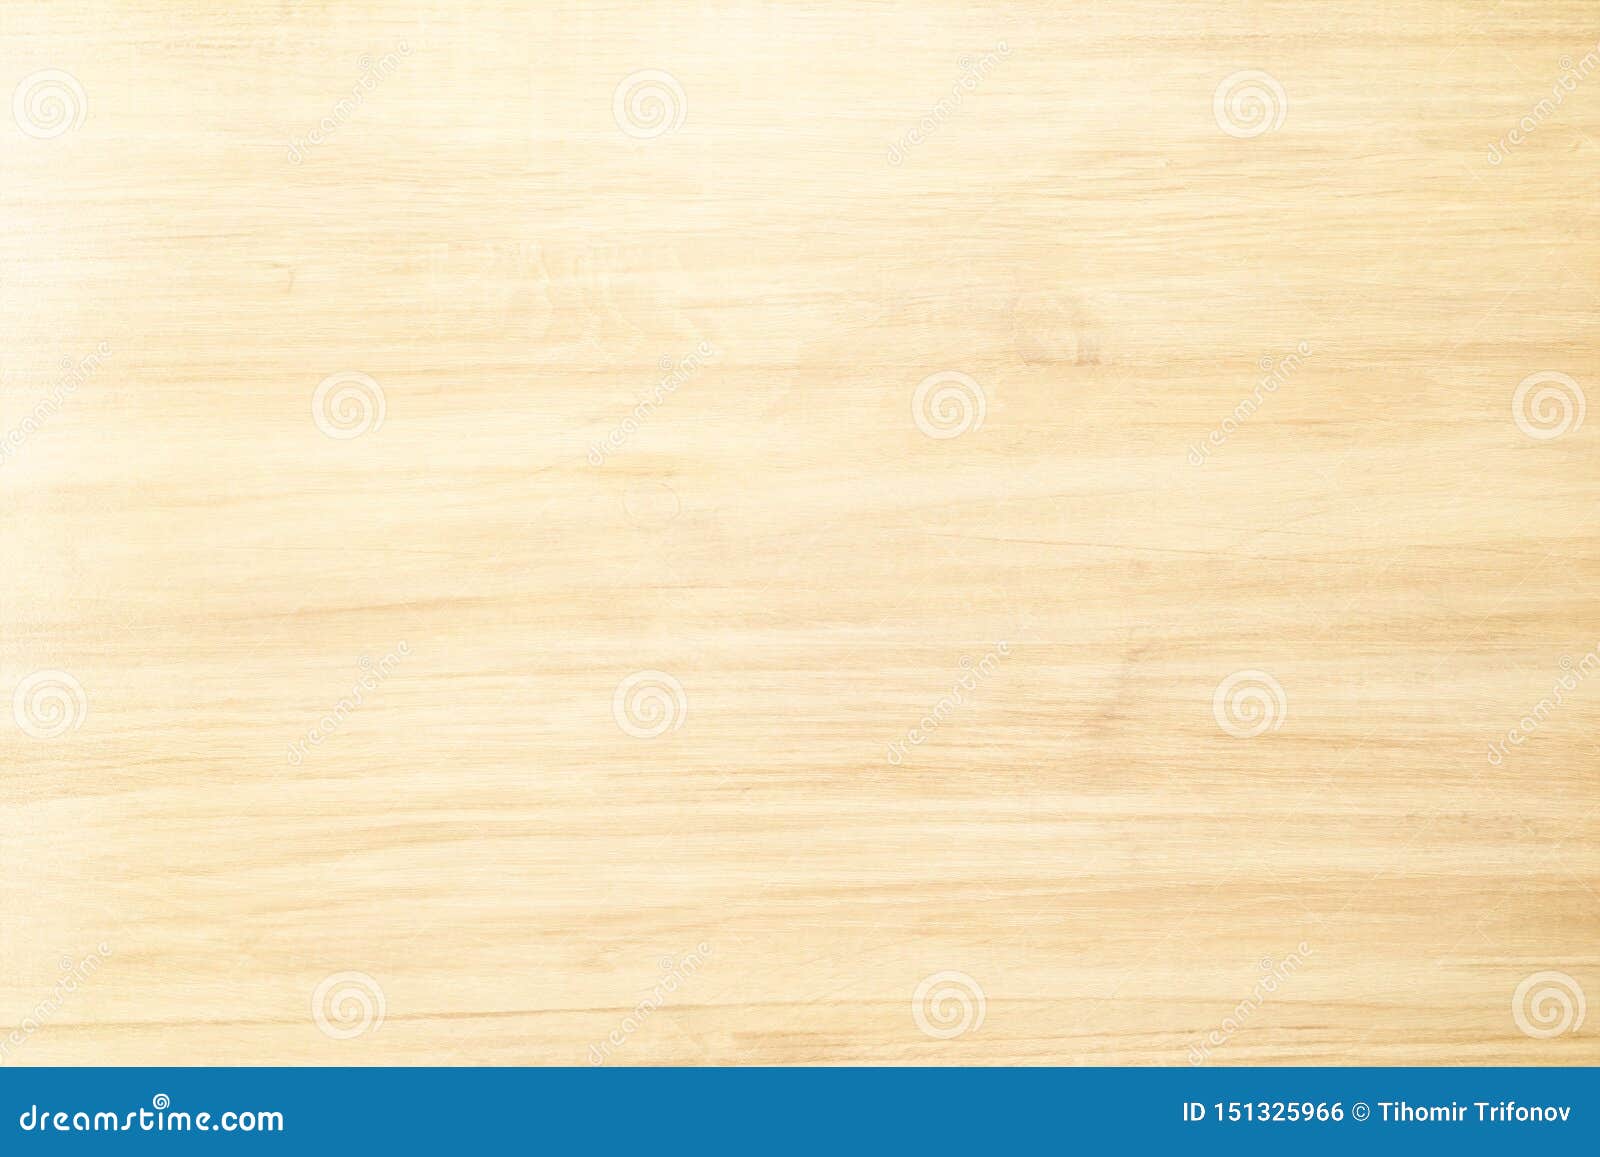 Brown Wood Texture, Light Wooden Abstract Background Stock Photo ...